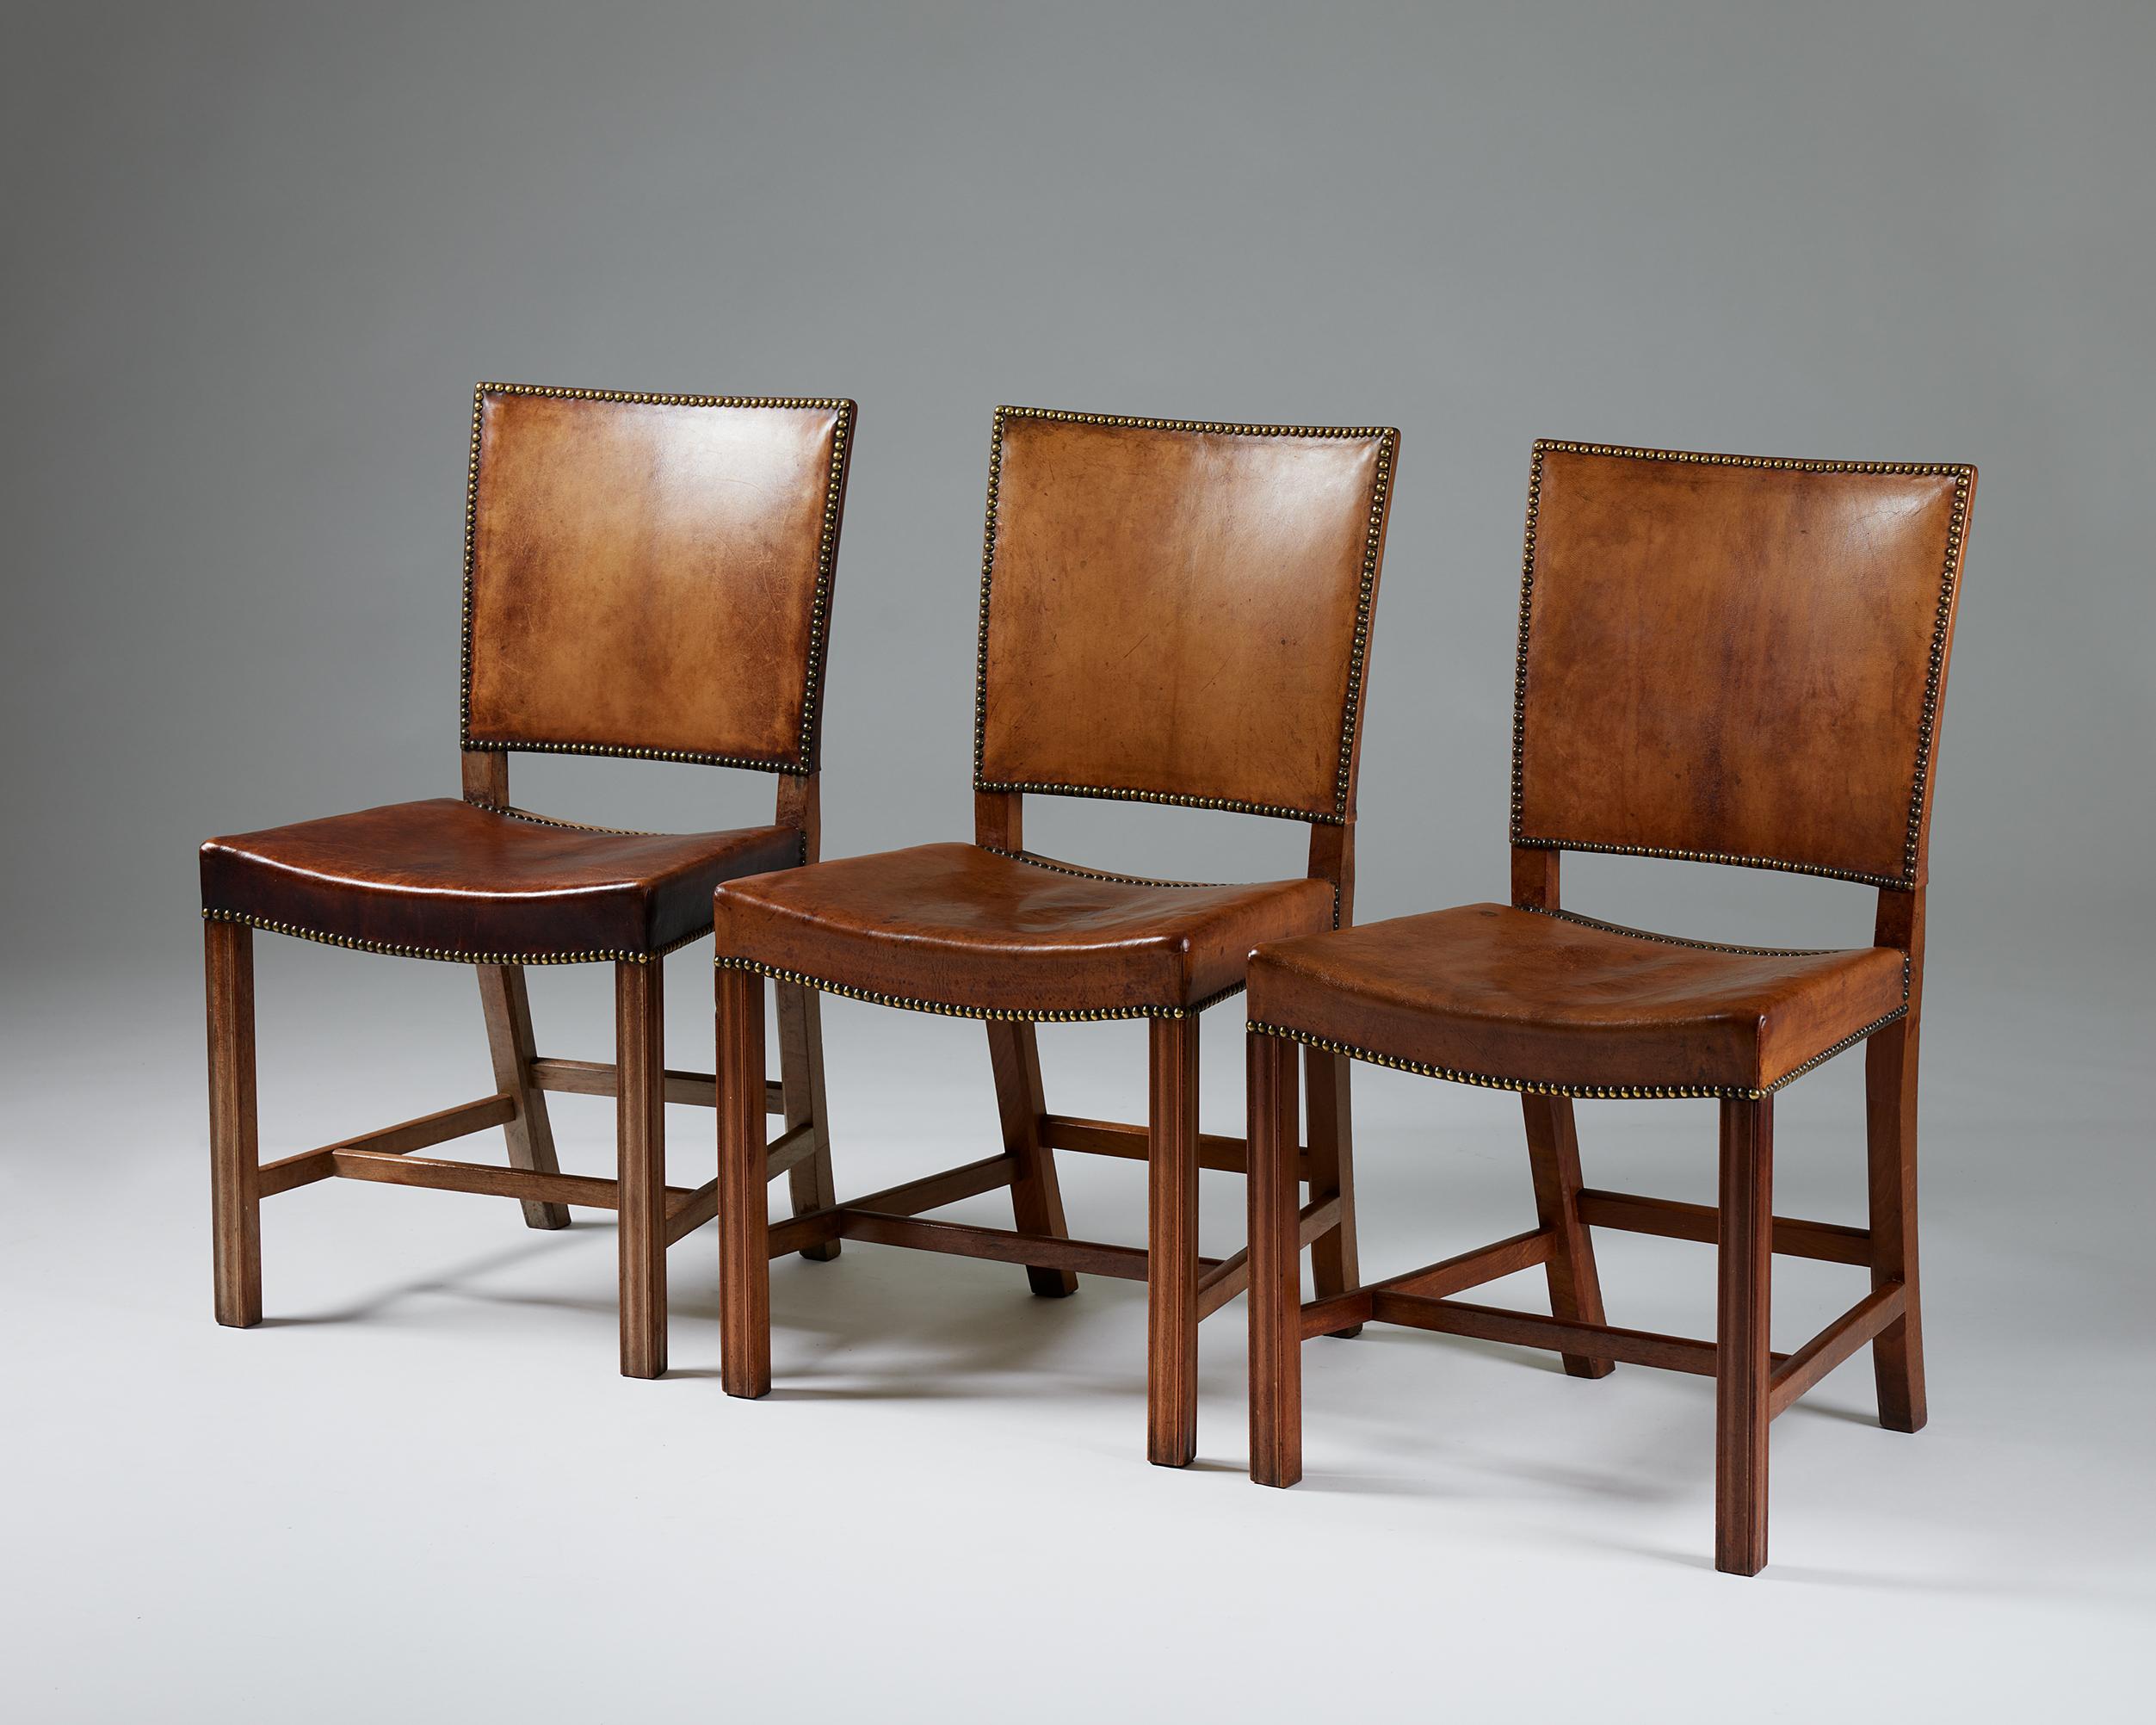 Set of three chairs ‘The Red Chairs’ model 3949 designed by Kaare Klint for Rud. Rasmussen Fabrik,
Denmark, 1928.

Cuban mahogany, Niger leather, upholstery and brass nails.

Marked.

Our set of three ‘The Red Chairs’ model 3949 designed by Kaare